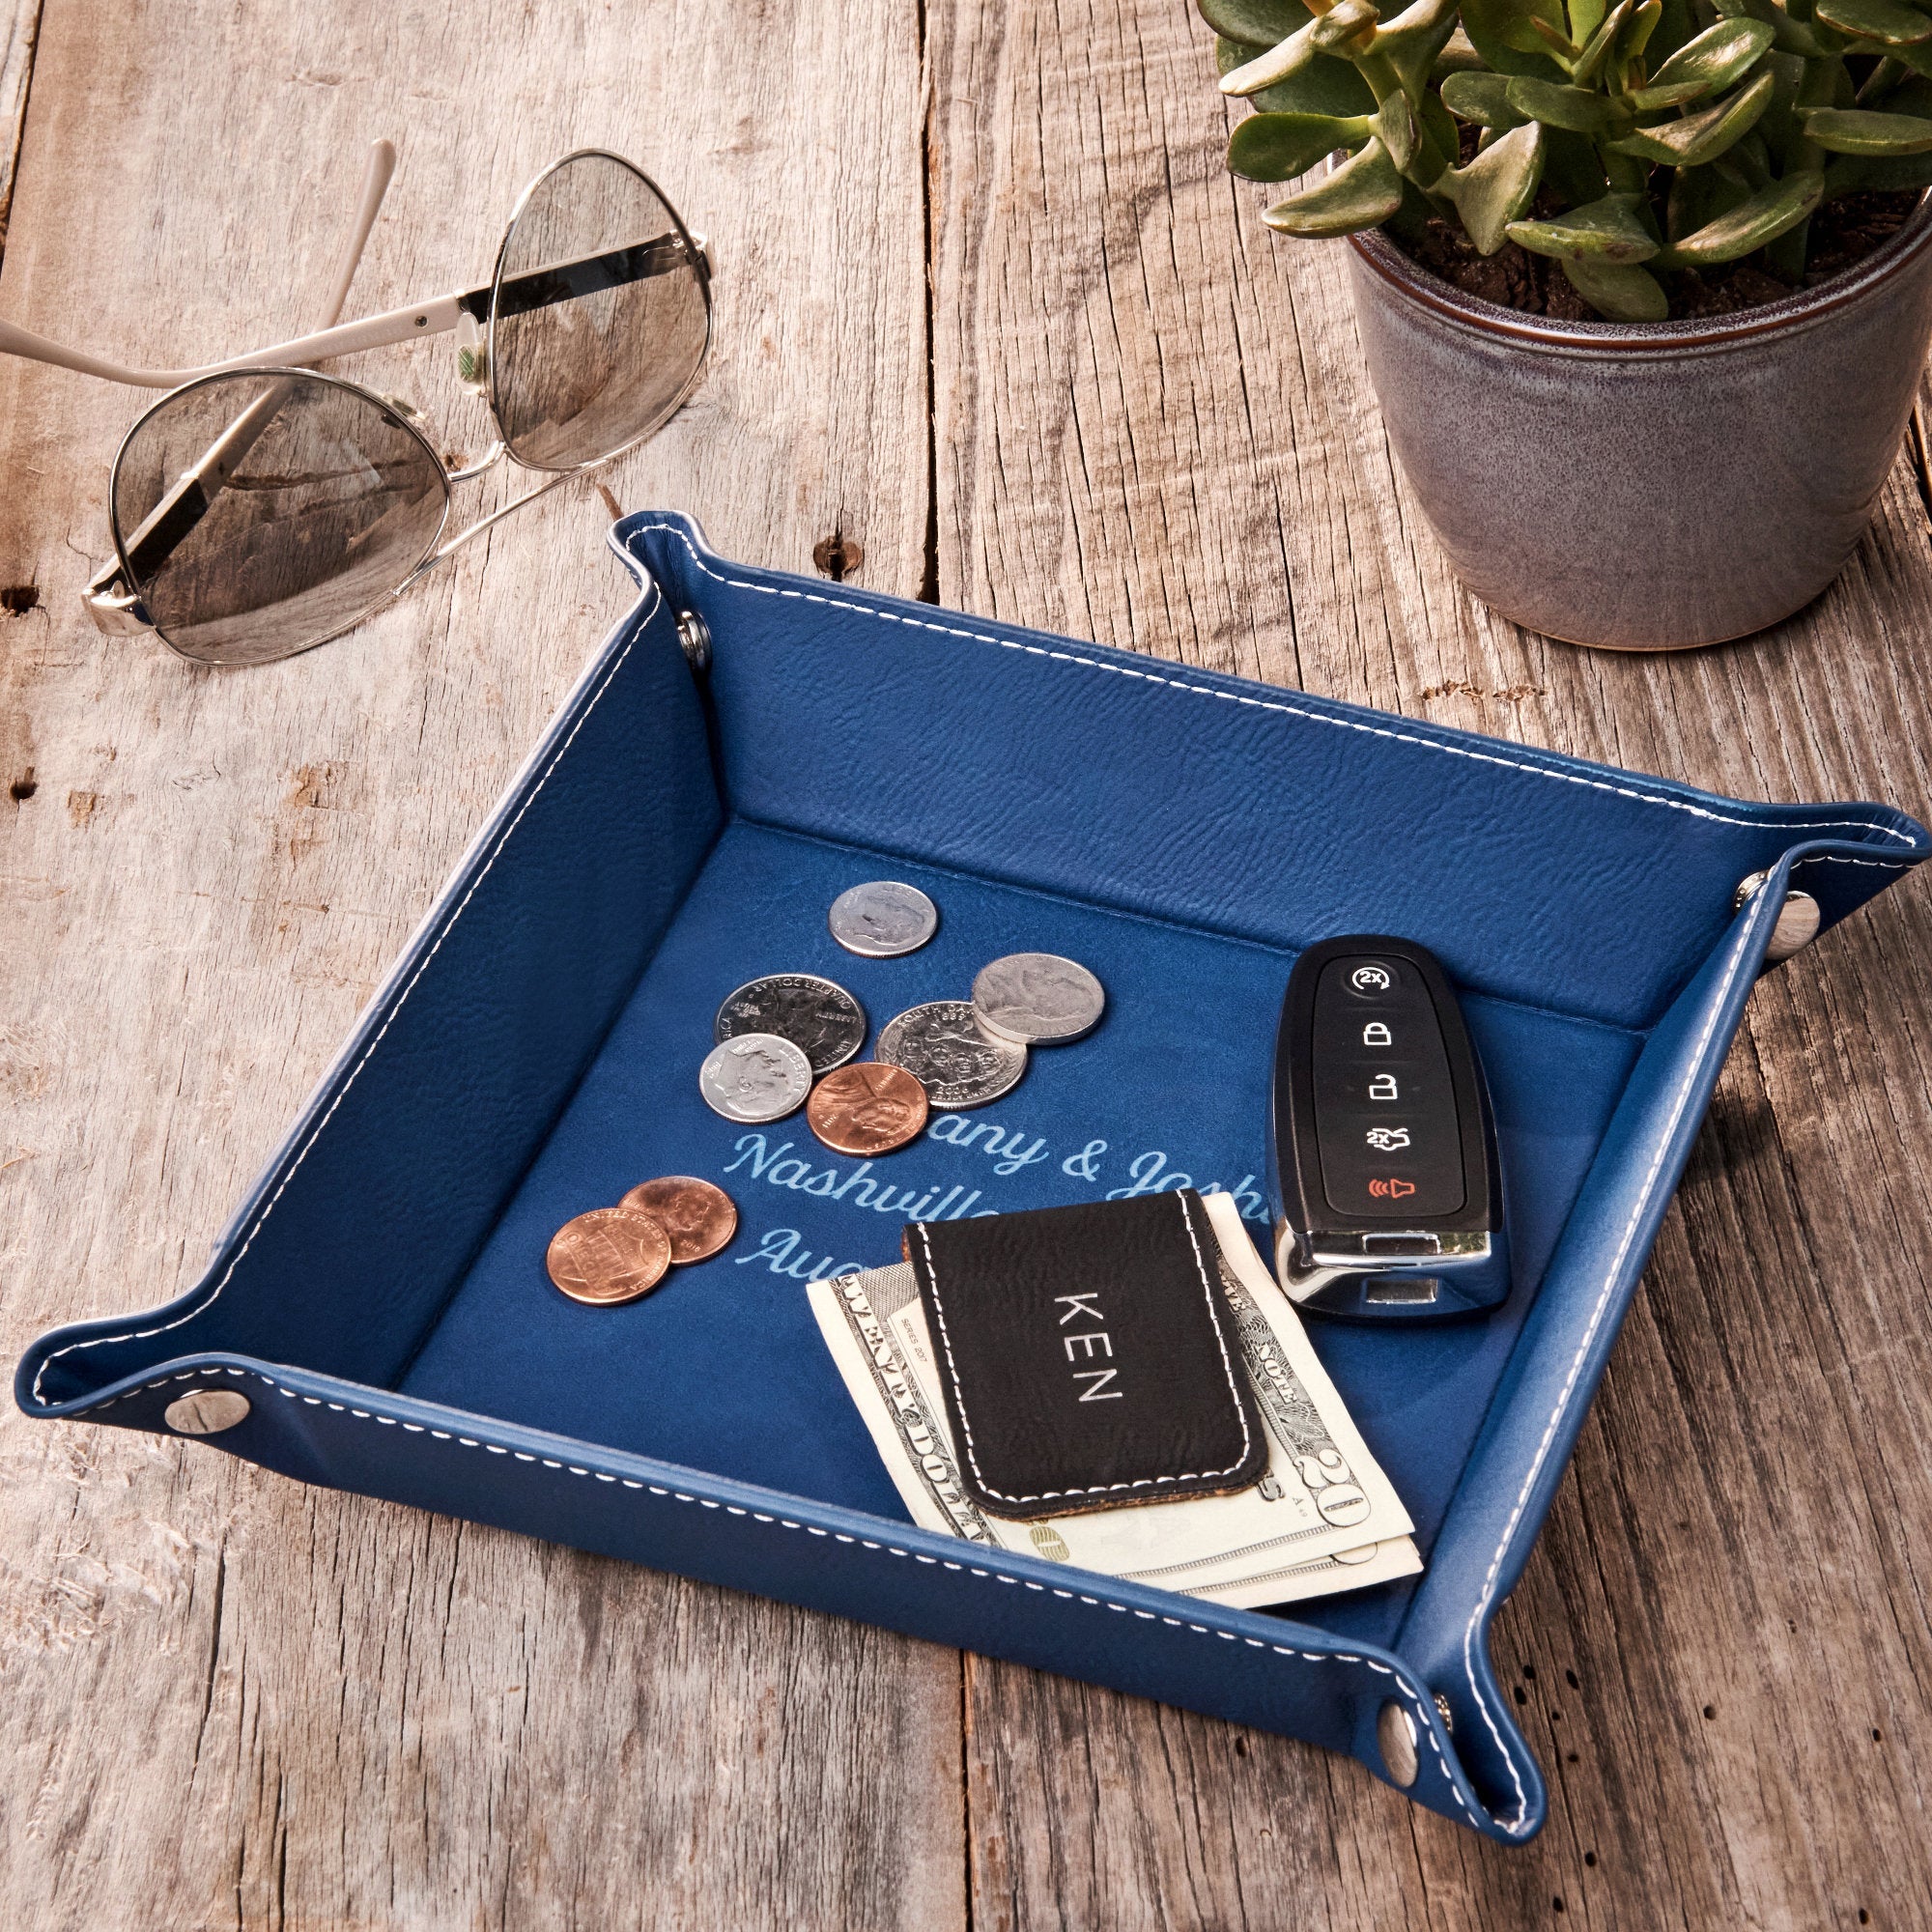 Personalized Perlinger Togo Custom Valet Tray Leather Tray 